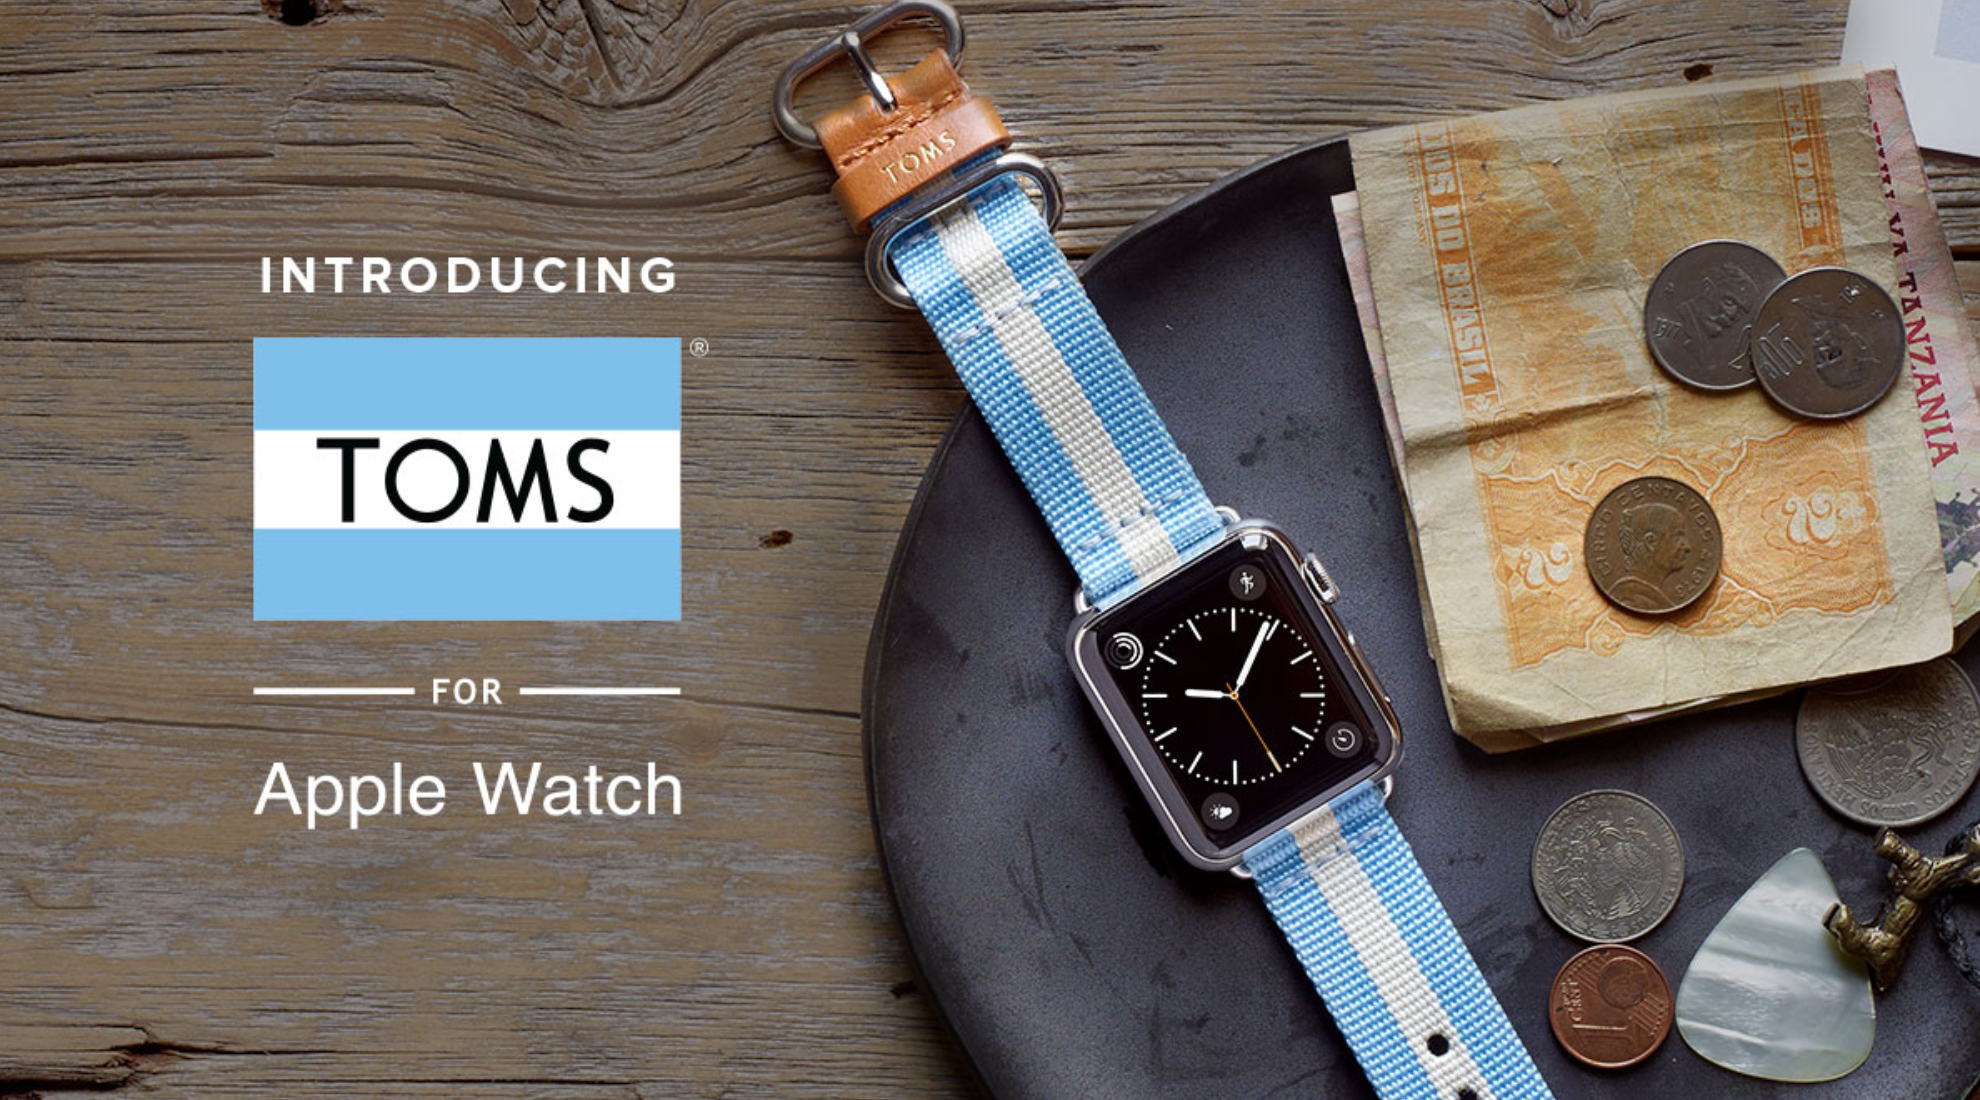 TOMS Apple Watch Bands With Charitable Bonus Make Their Debut